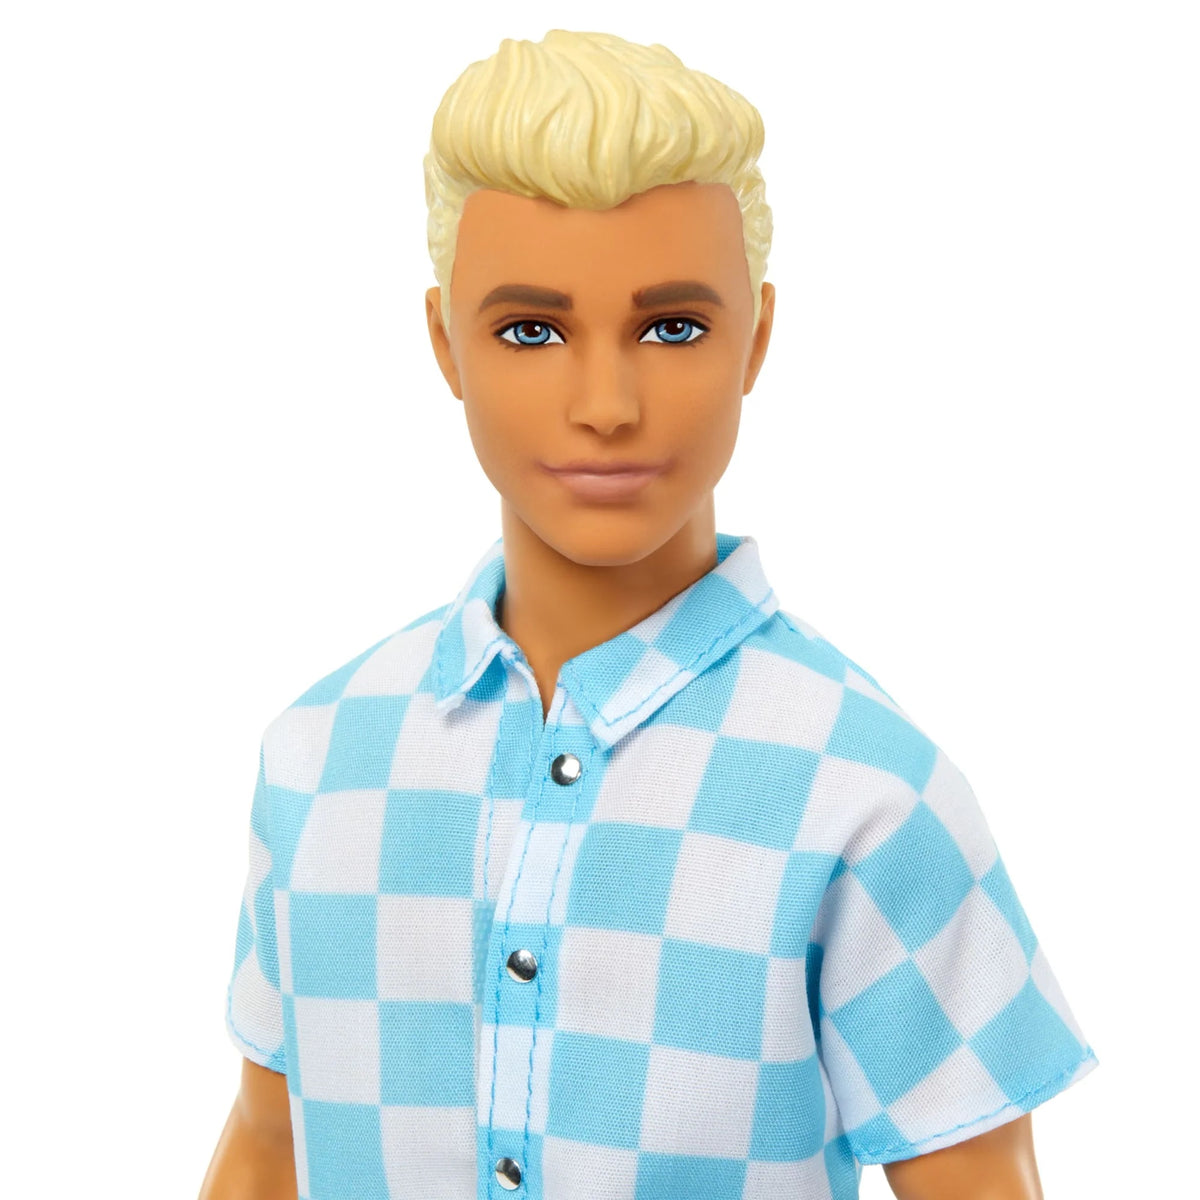 Ken Doll with Swim Trunks and Beach-Themed Accessories